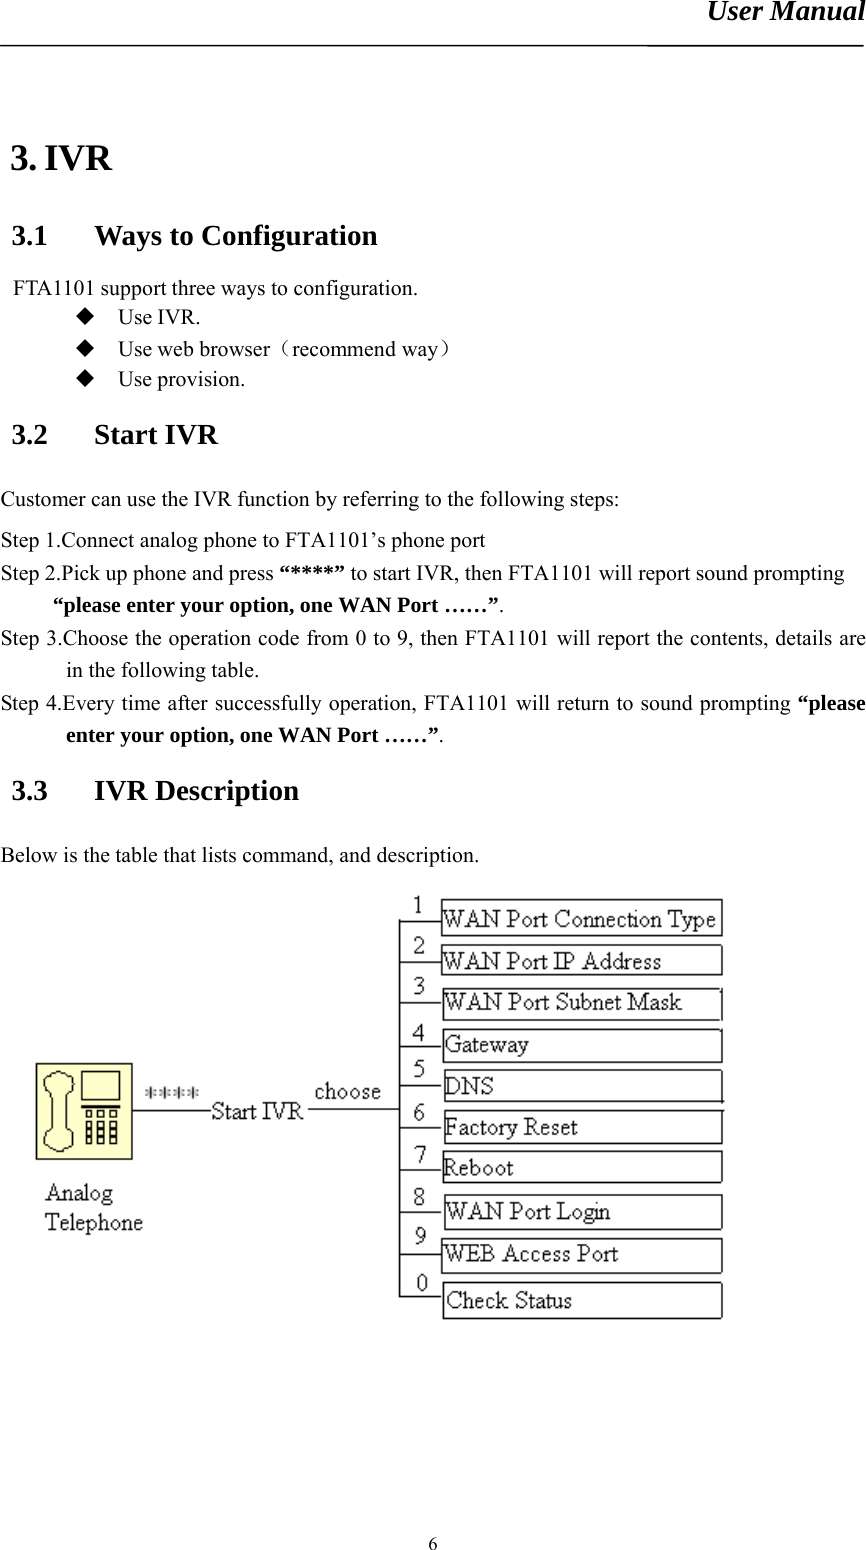 User Manual       63. IVR 3.1 Ways to Configuration FTA1101 support three ways to configuration.  Use IVR.  Use web browser（recommend way）  Use provision. 3.2 Start IVR Customer can use the IVR function by referring to the following steps: Step 1.Connect analog phone to FTA1101’s phone port Step 2.Pick up phone and press “****” to start IVR, then FTA1101 will report sound prompting   “please enter your option, one WAN Port ……”. Step 3.Choose the operation code from 0 to 9, then FTA1101 will report the contents, details are in the following table. Step 4.Every time after successfully operation, FTA1101 will return to sound prompting “please enter your option, one WAN Port ……”. 3.3 IVR Description Below is the table that lists command, and description.  